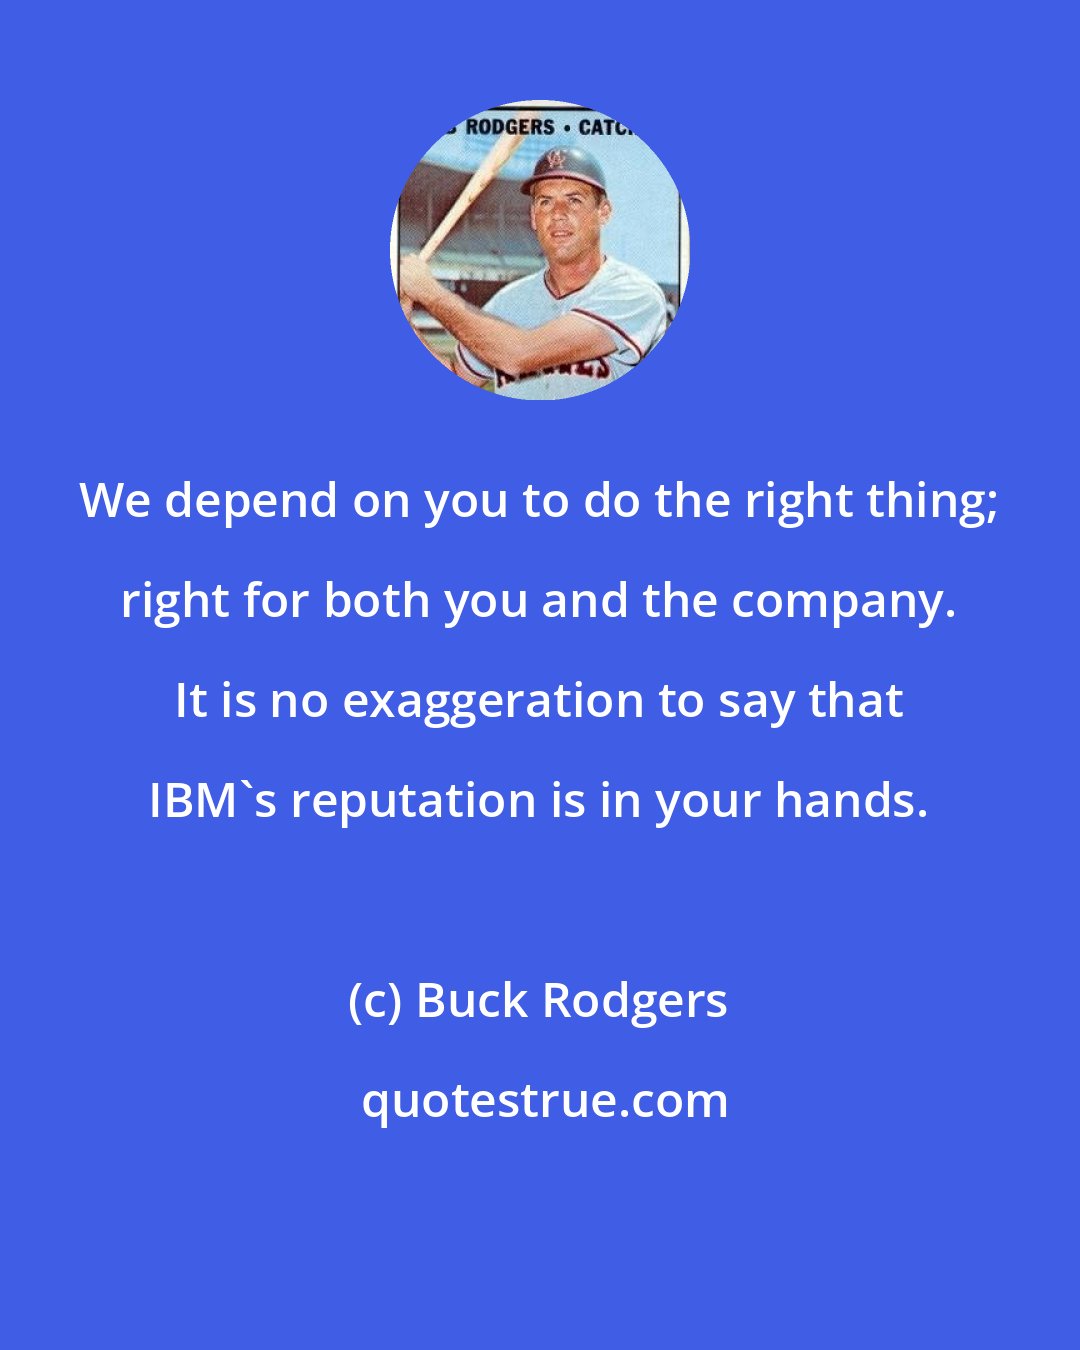 Buck Rodgers: We depend on you to do the right thing; right for both you and the company. It is no exaggeration to say that IBM's reputation is in your hands.